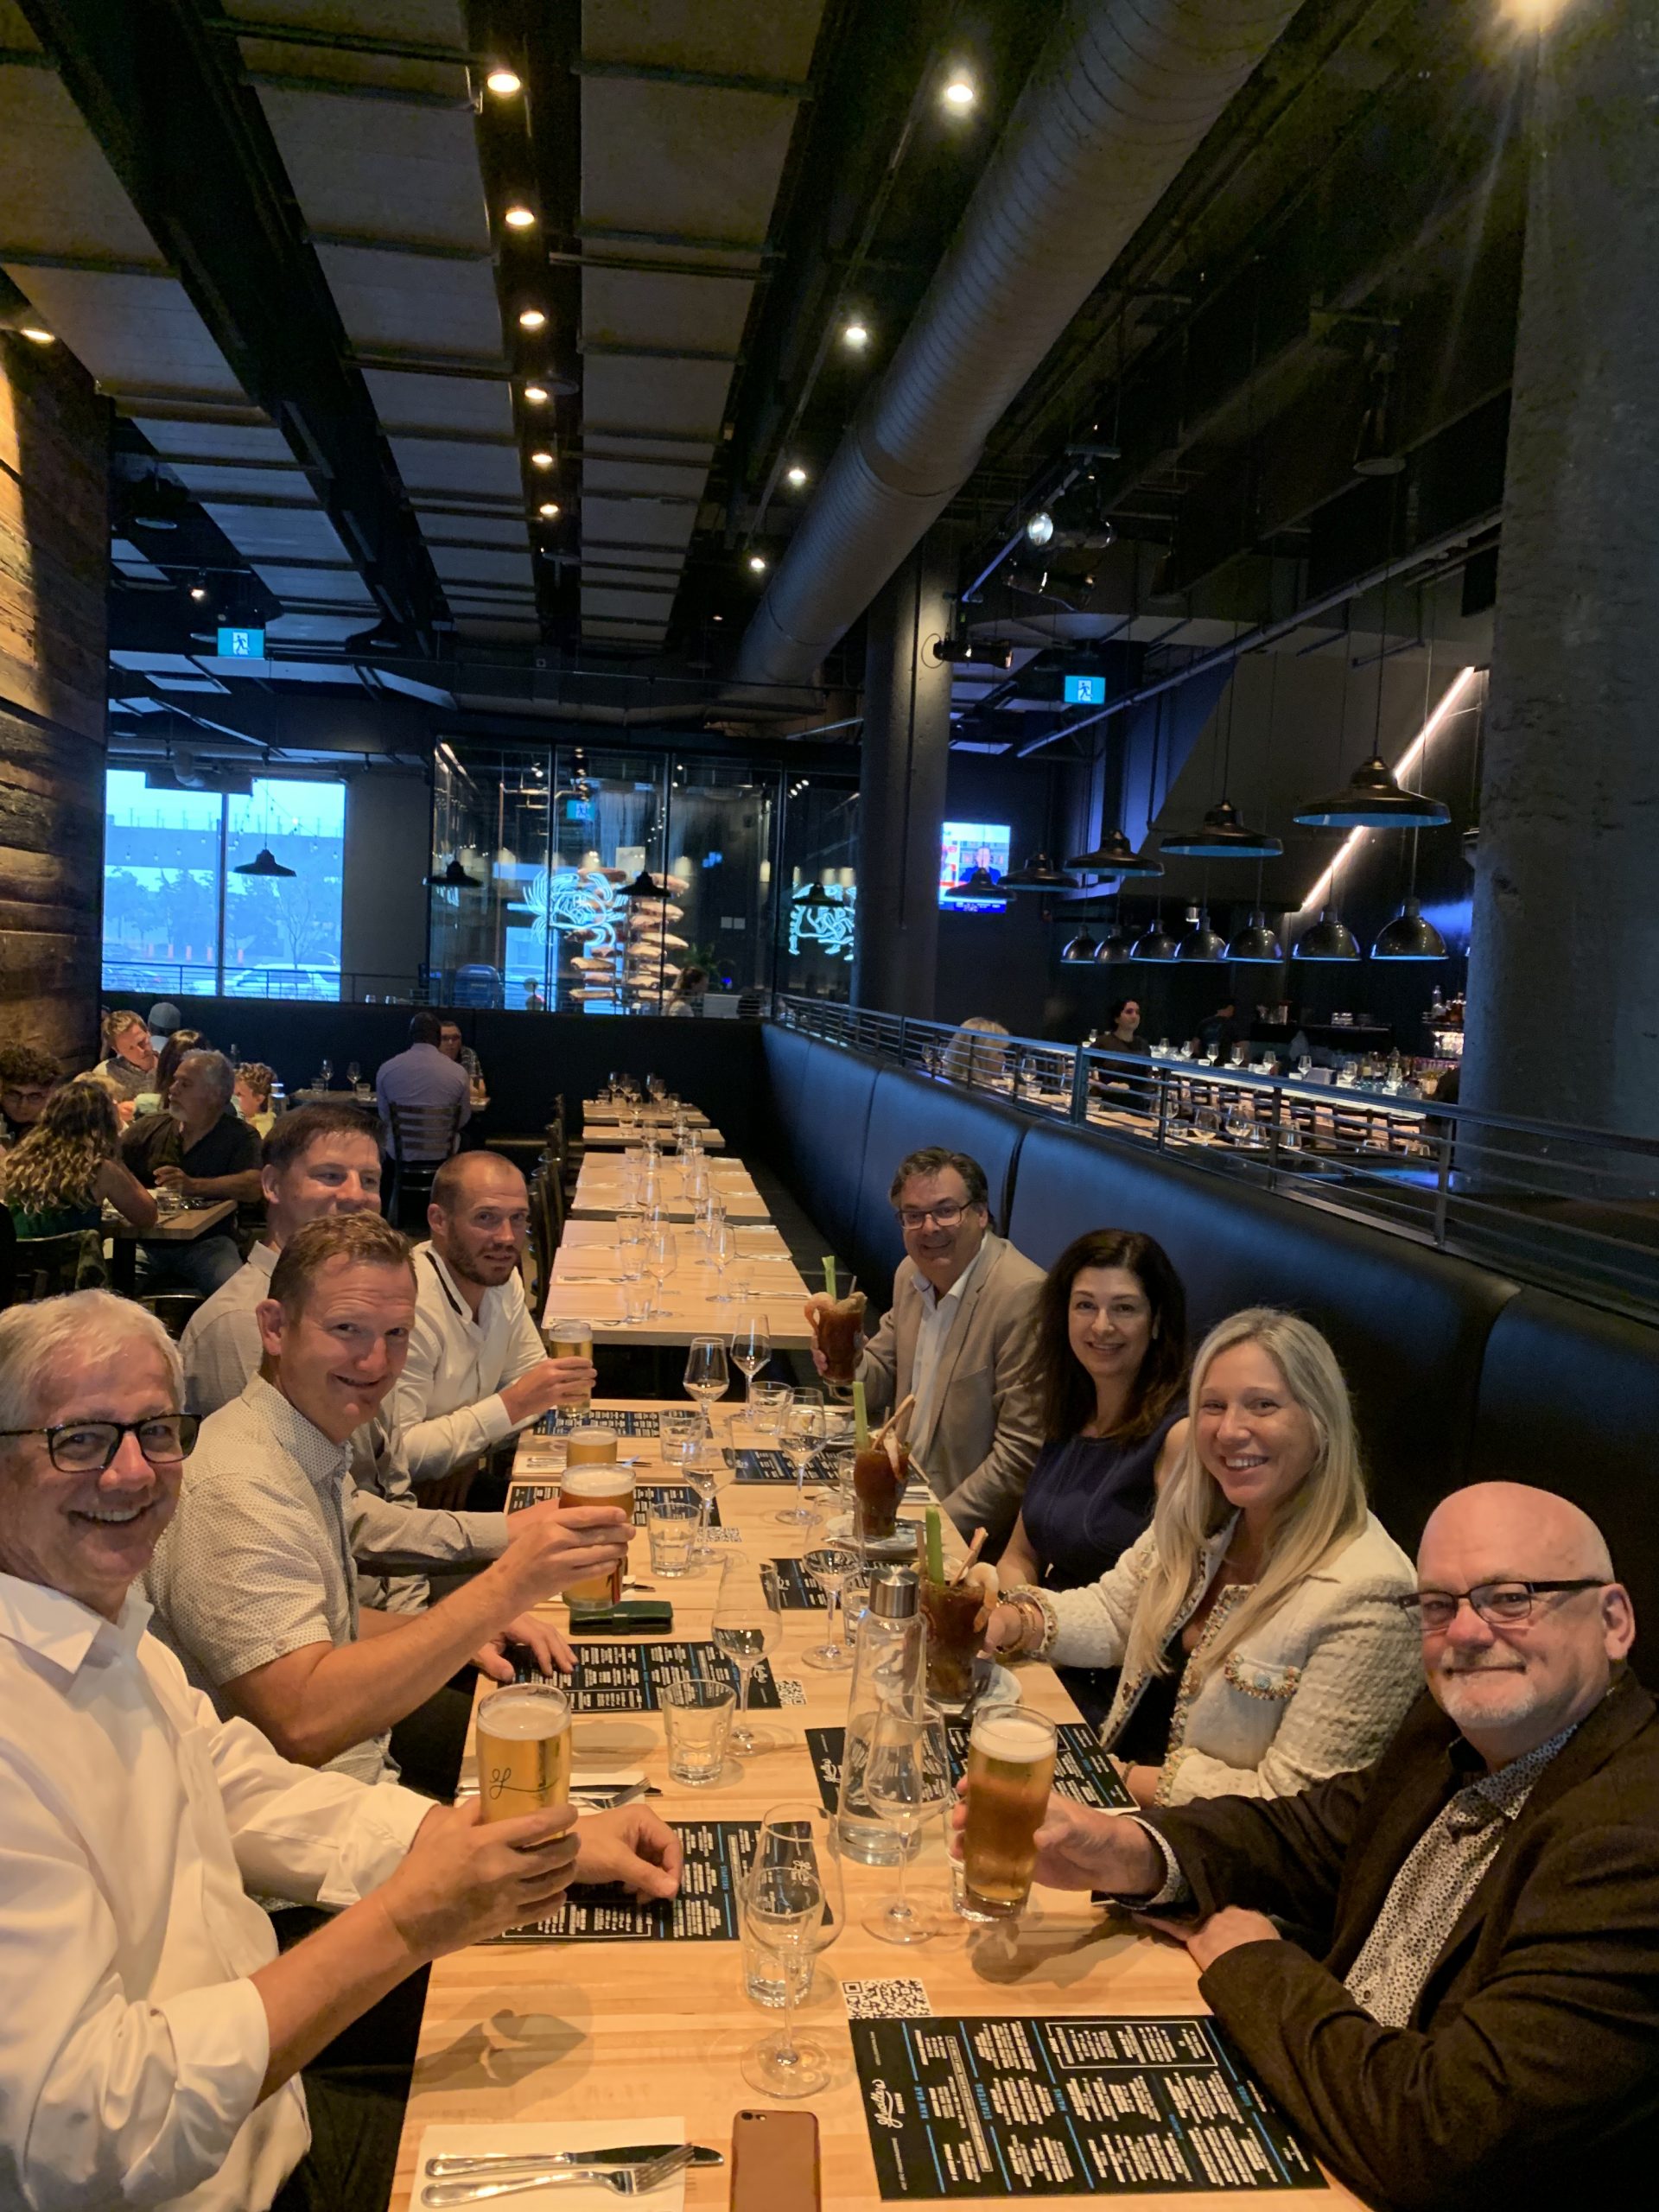 This week we had a great visit from our Hilco Capital investors where we had the chance to showcase all the wonderful accomplishments we have had so far and give a preview of the exciting things we have in store for Bentley’s future.